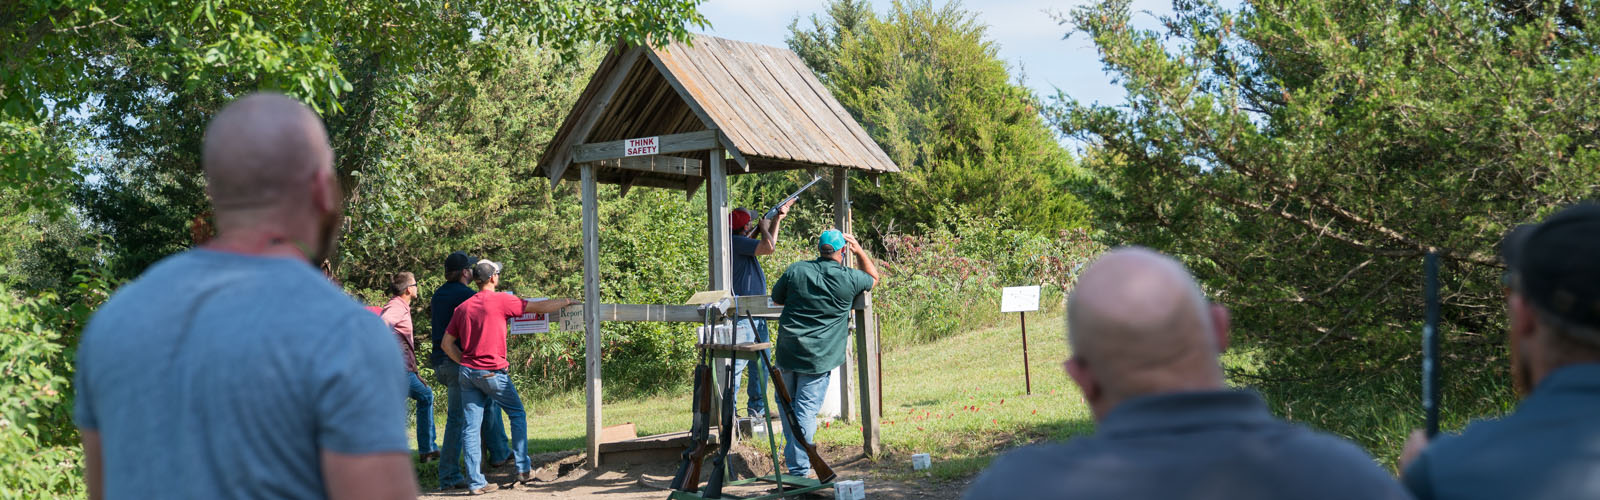 Tradition of Excellence Sporting Clay Event